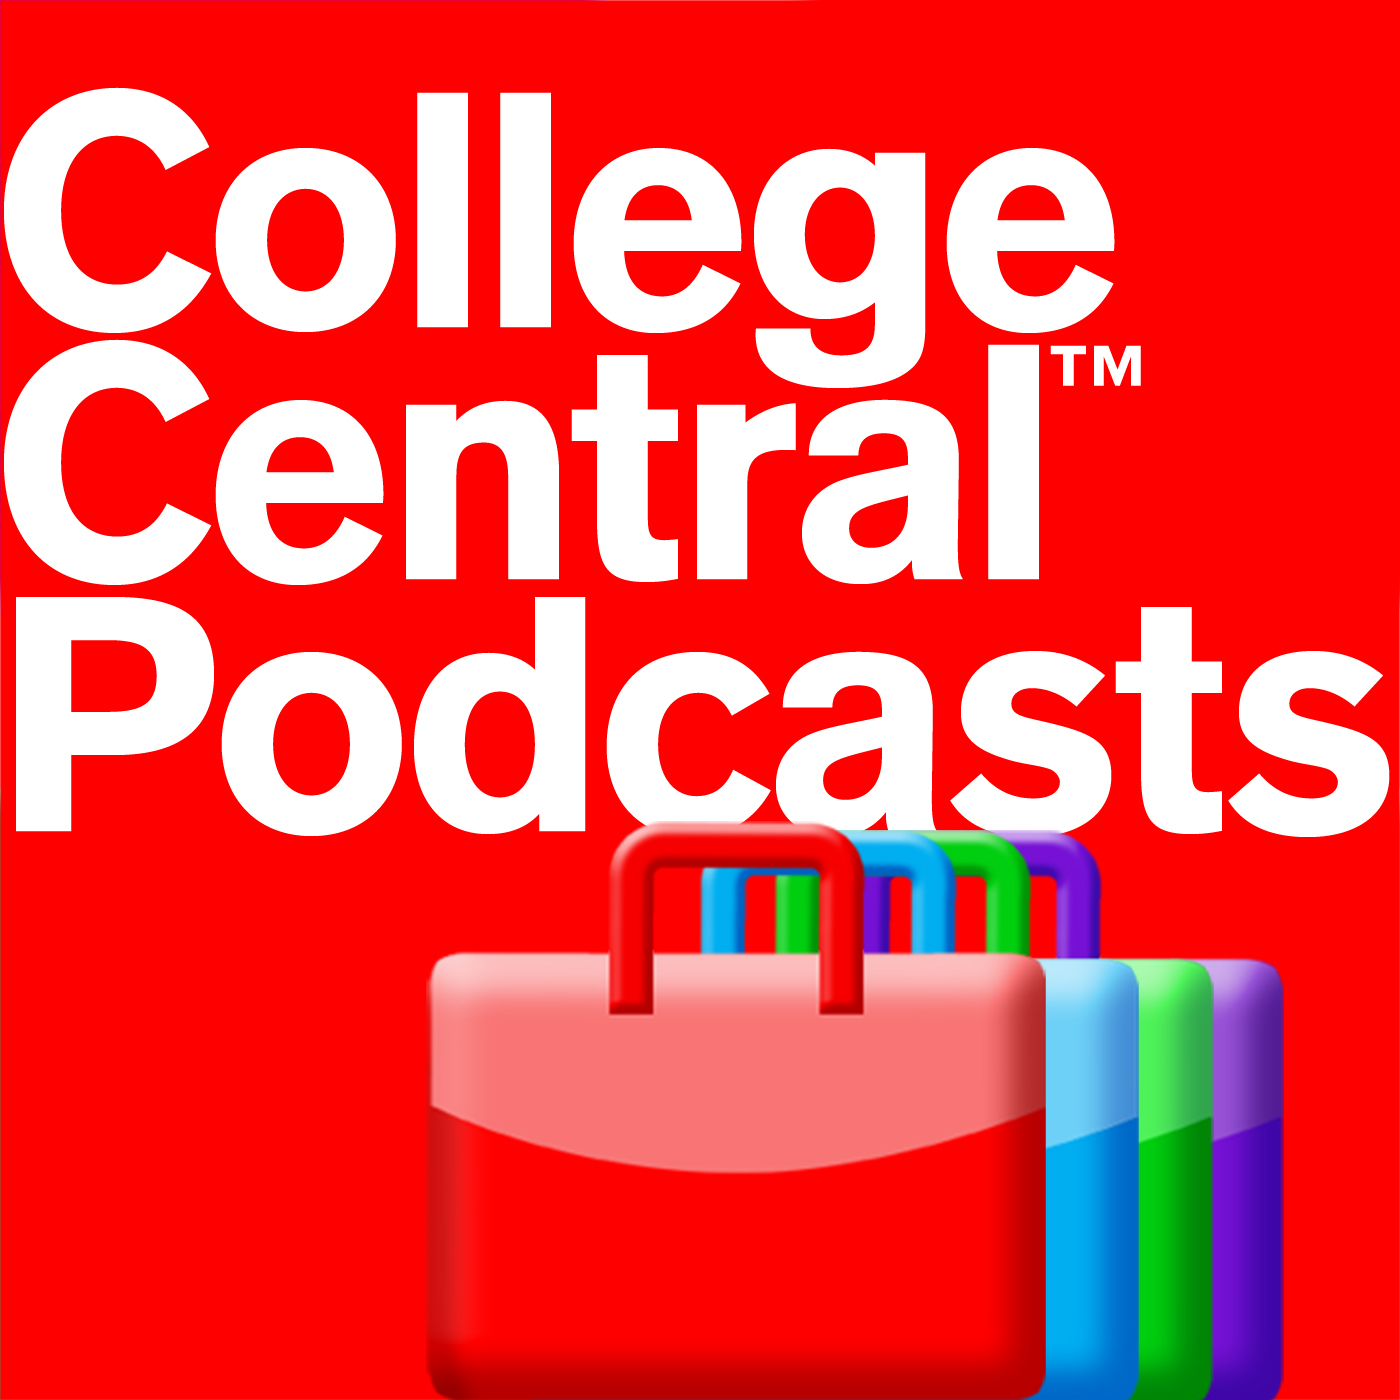 College Central Podcasts: Career and Job Search Advice